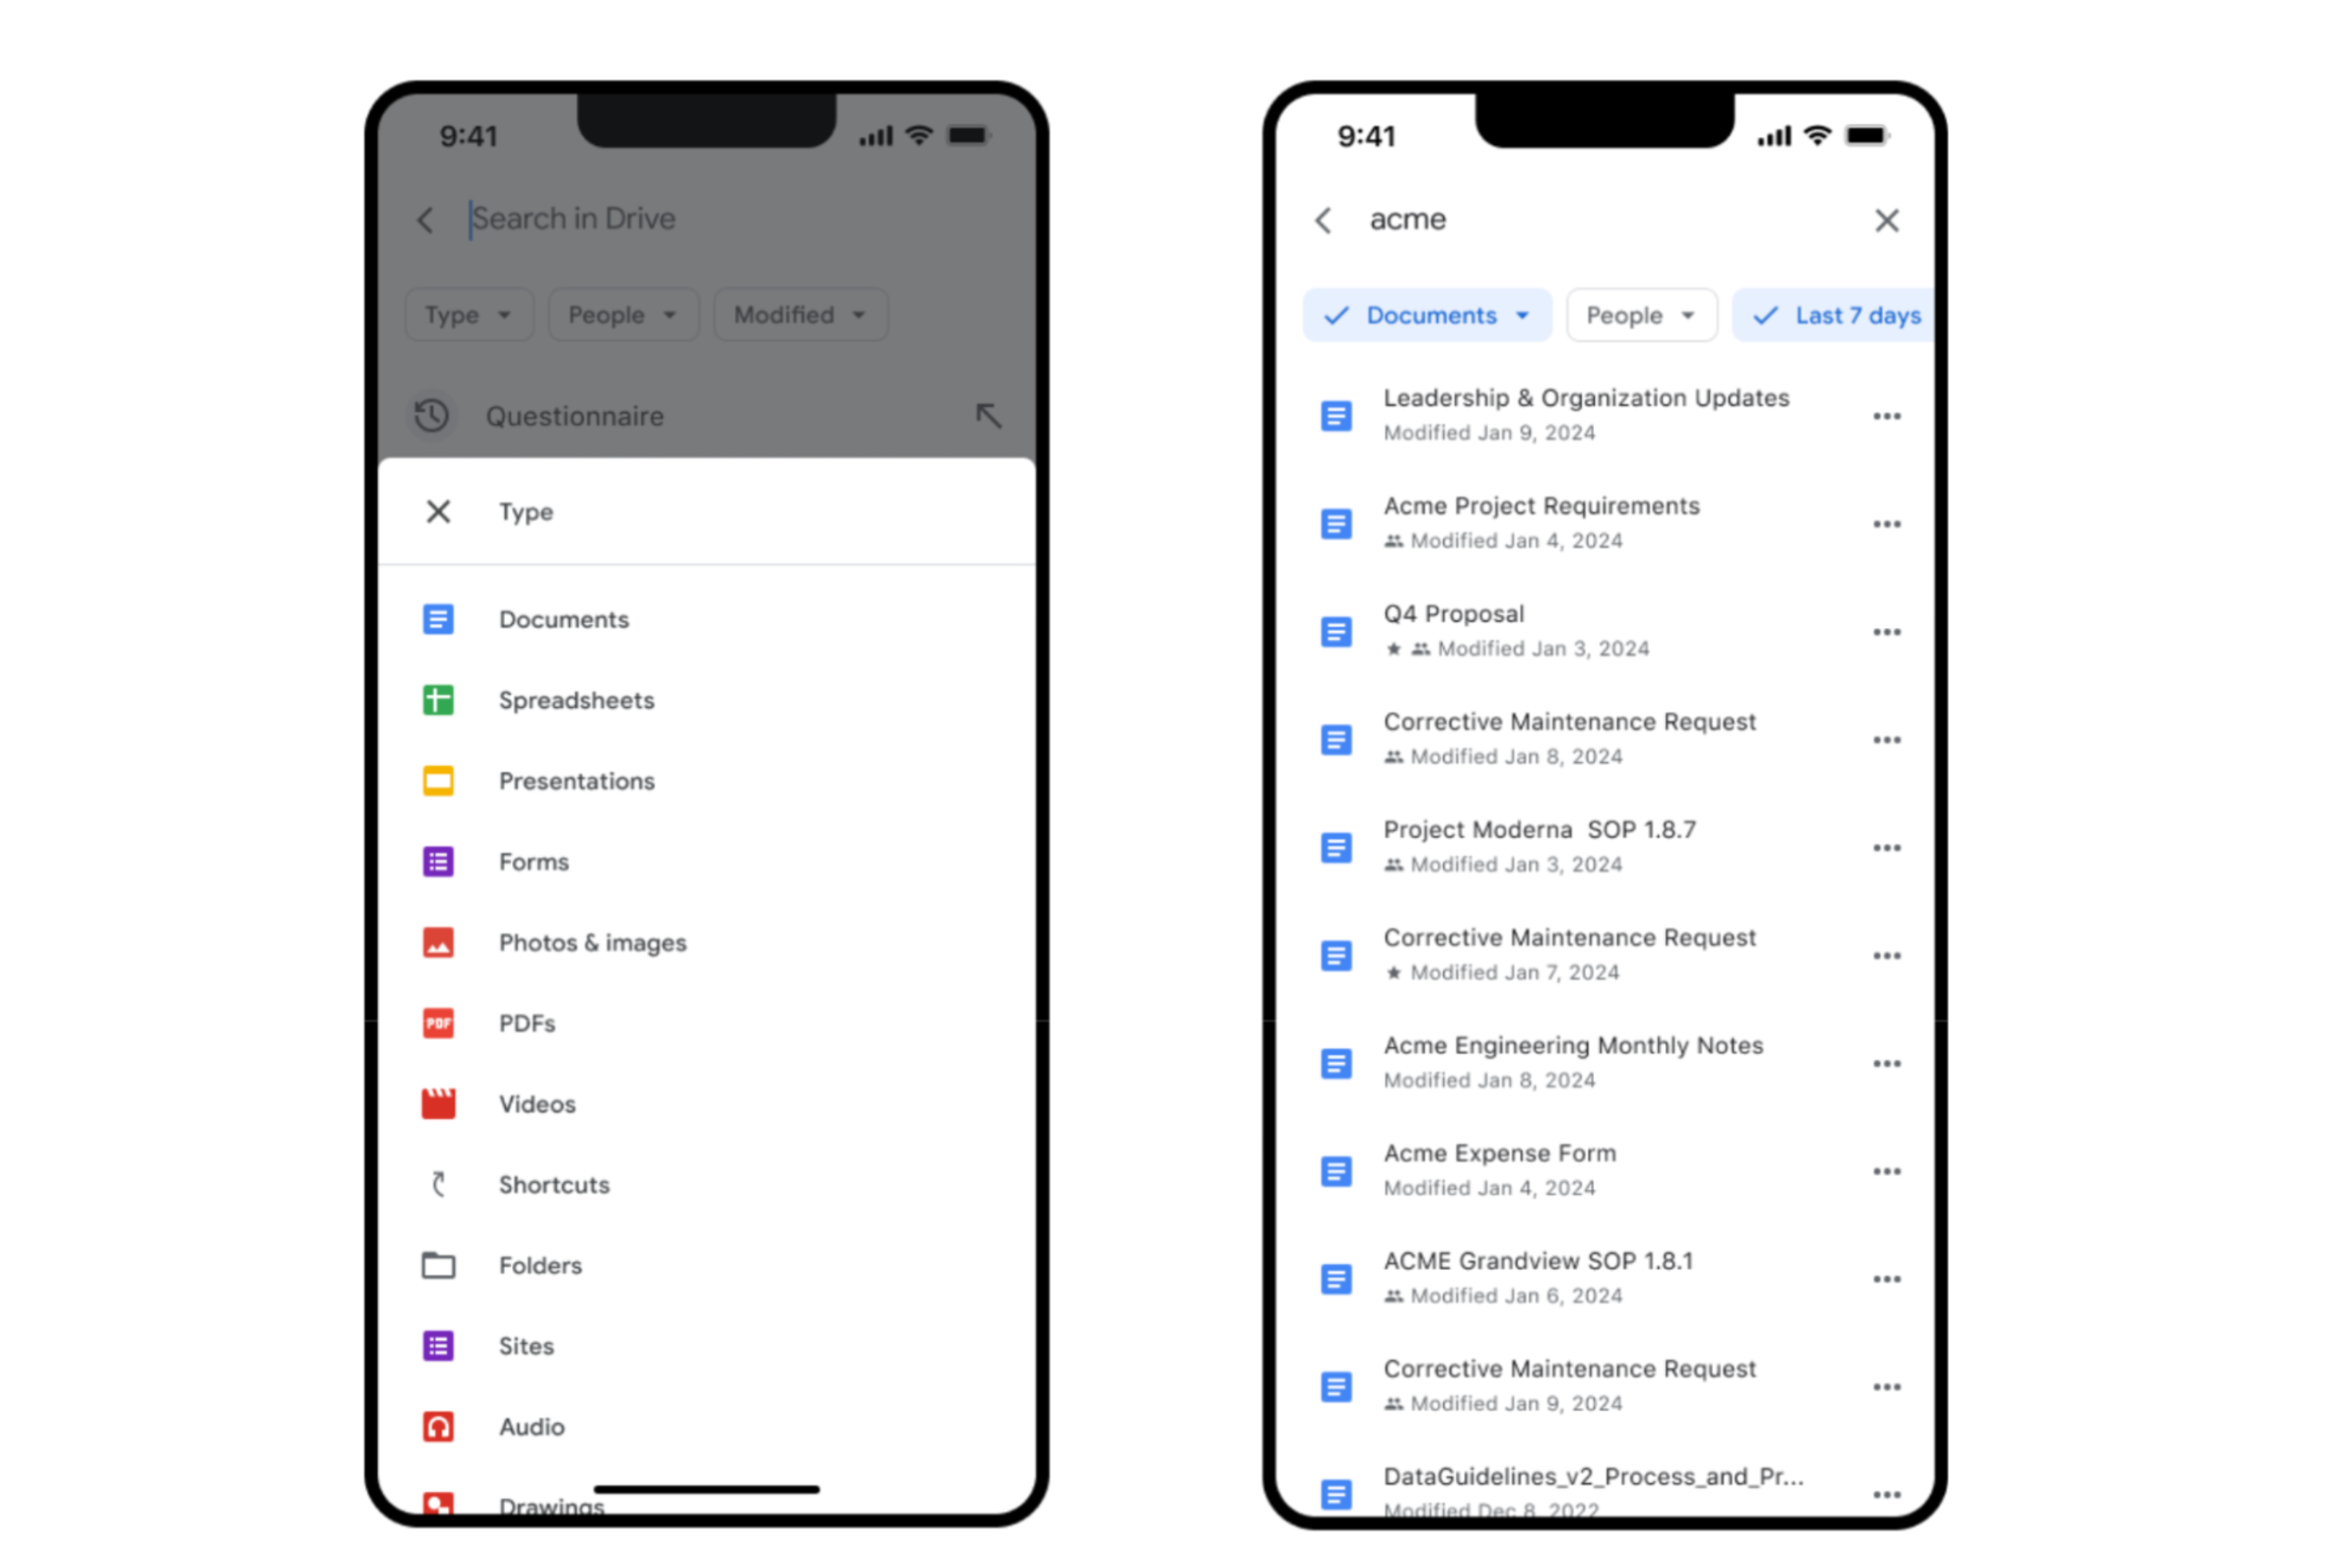 Google Drive's new search filters come to Android a month after they hit iOS